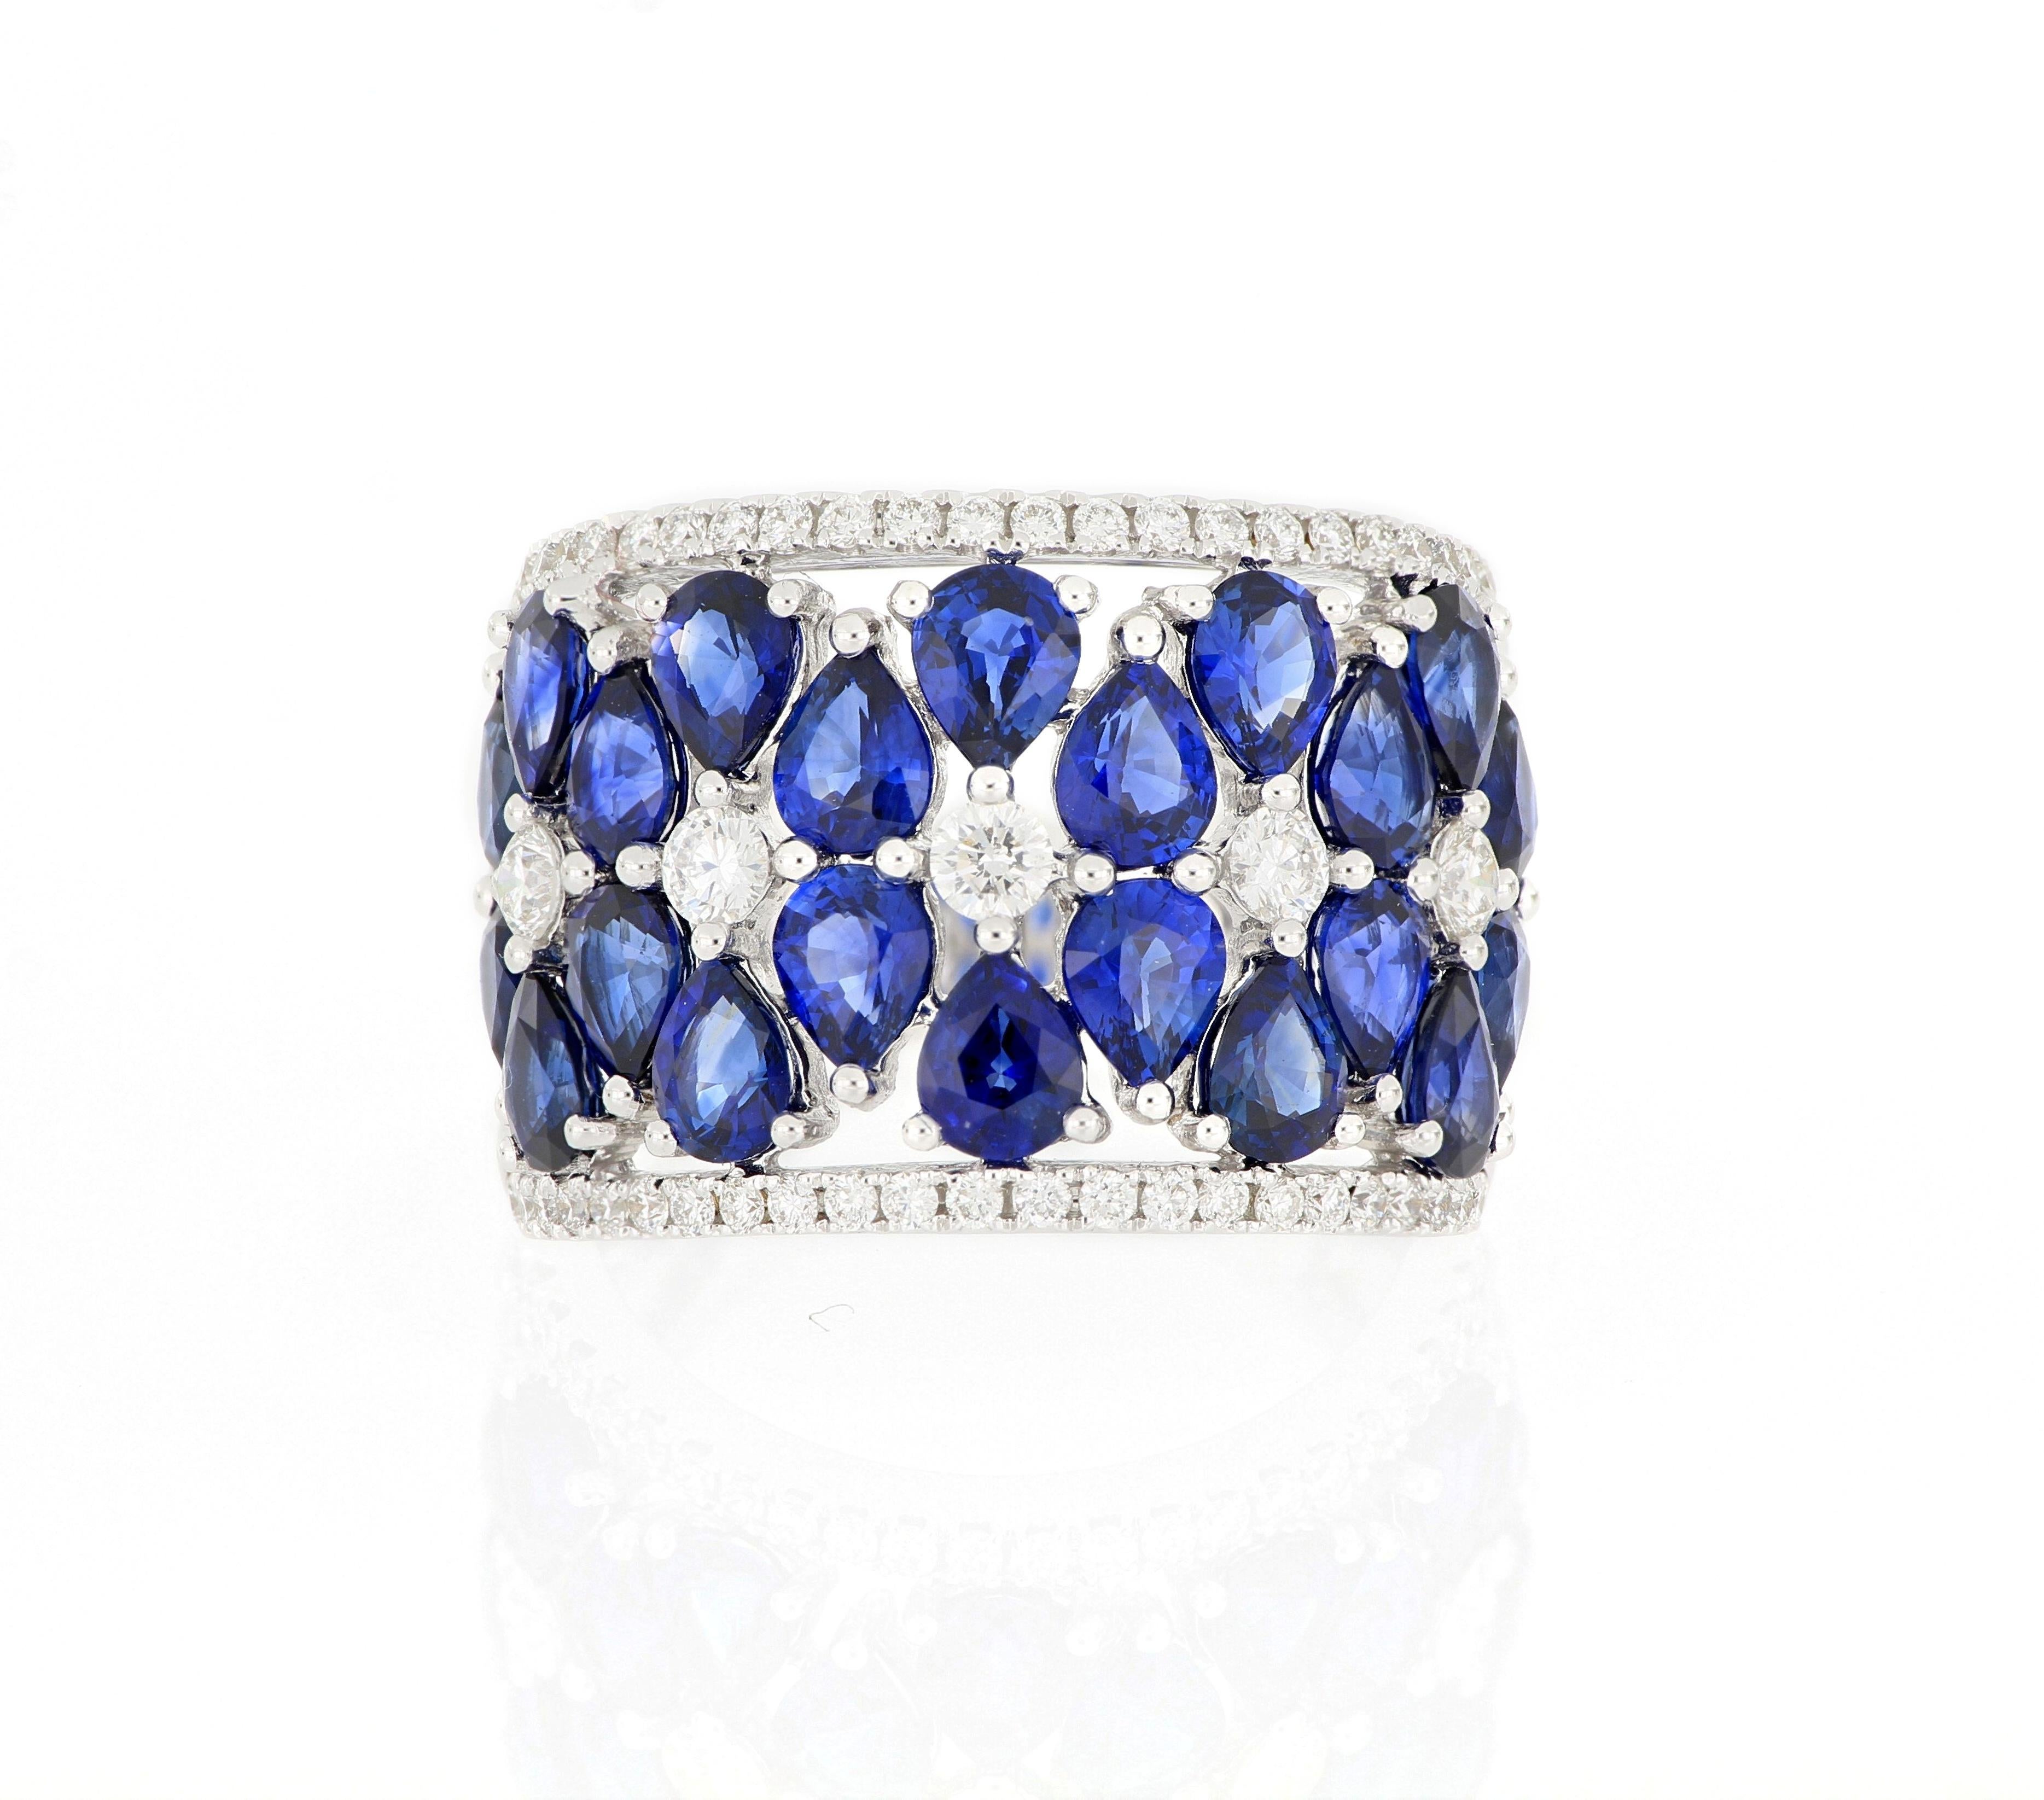 A stylish and elegant cocktail ring, composed of clusters of natural pear-shaped sapphire , surrounded by brilliant-cut diamonds, total weighing 5.61 carats and  0.67 carats respectively ,mounted in 18 karat gold. 
O’Che 1867 is renowned for its